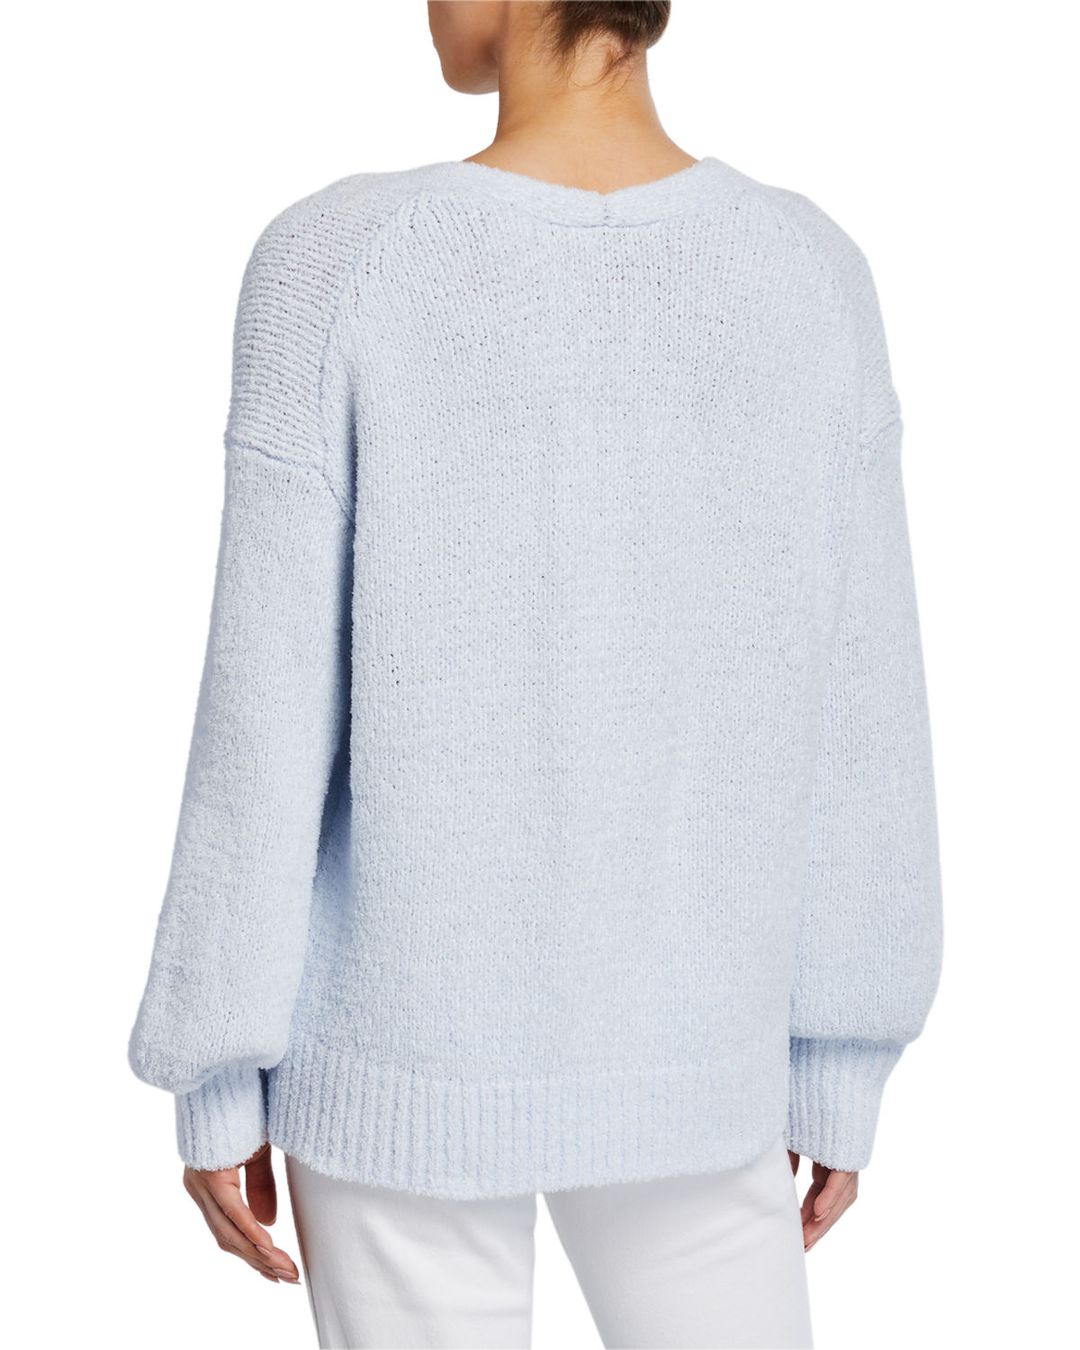 Vince - Textured V-Neck Sweater in Powder Blue